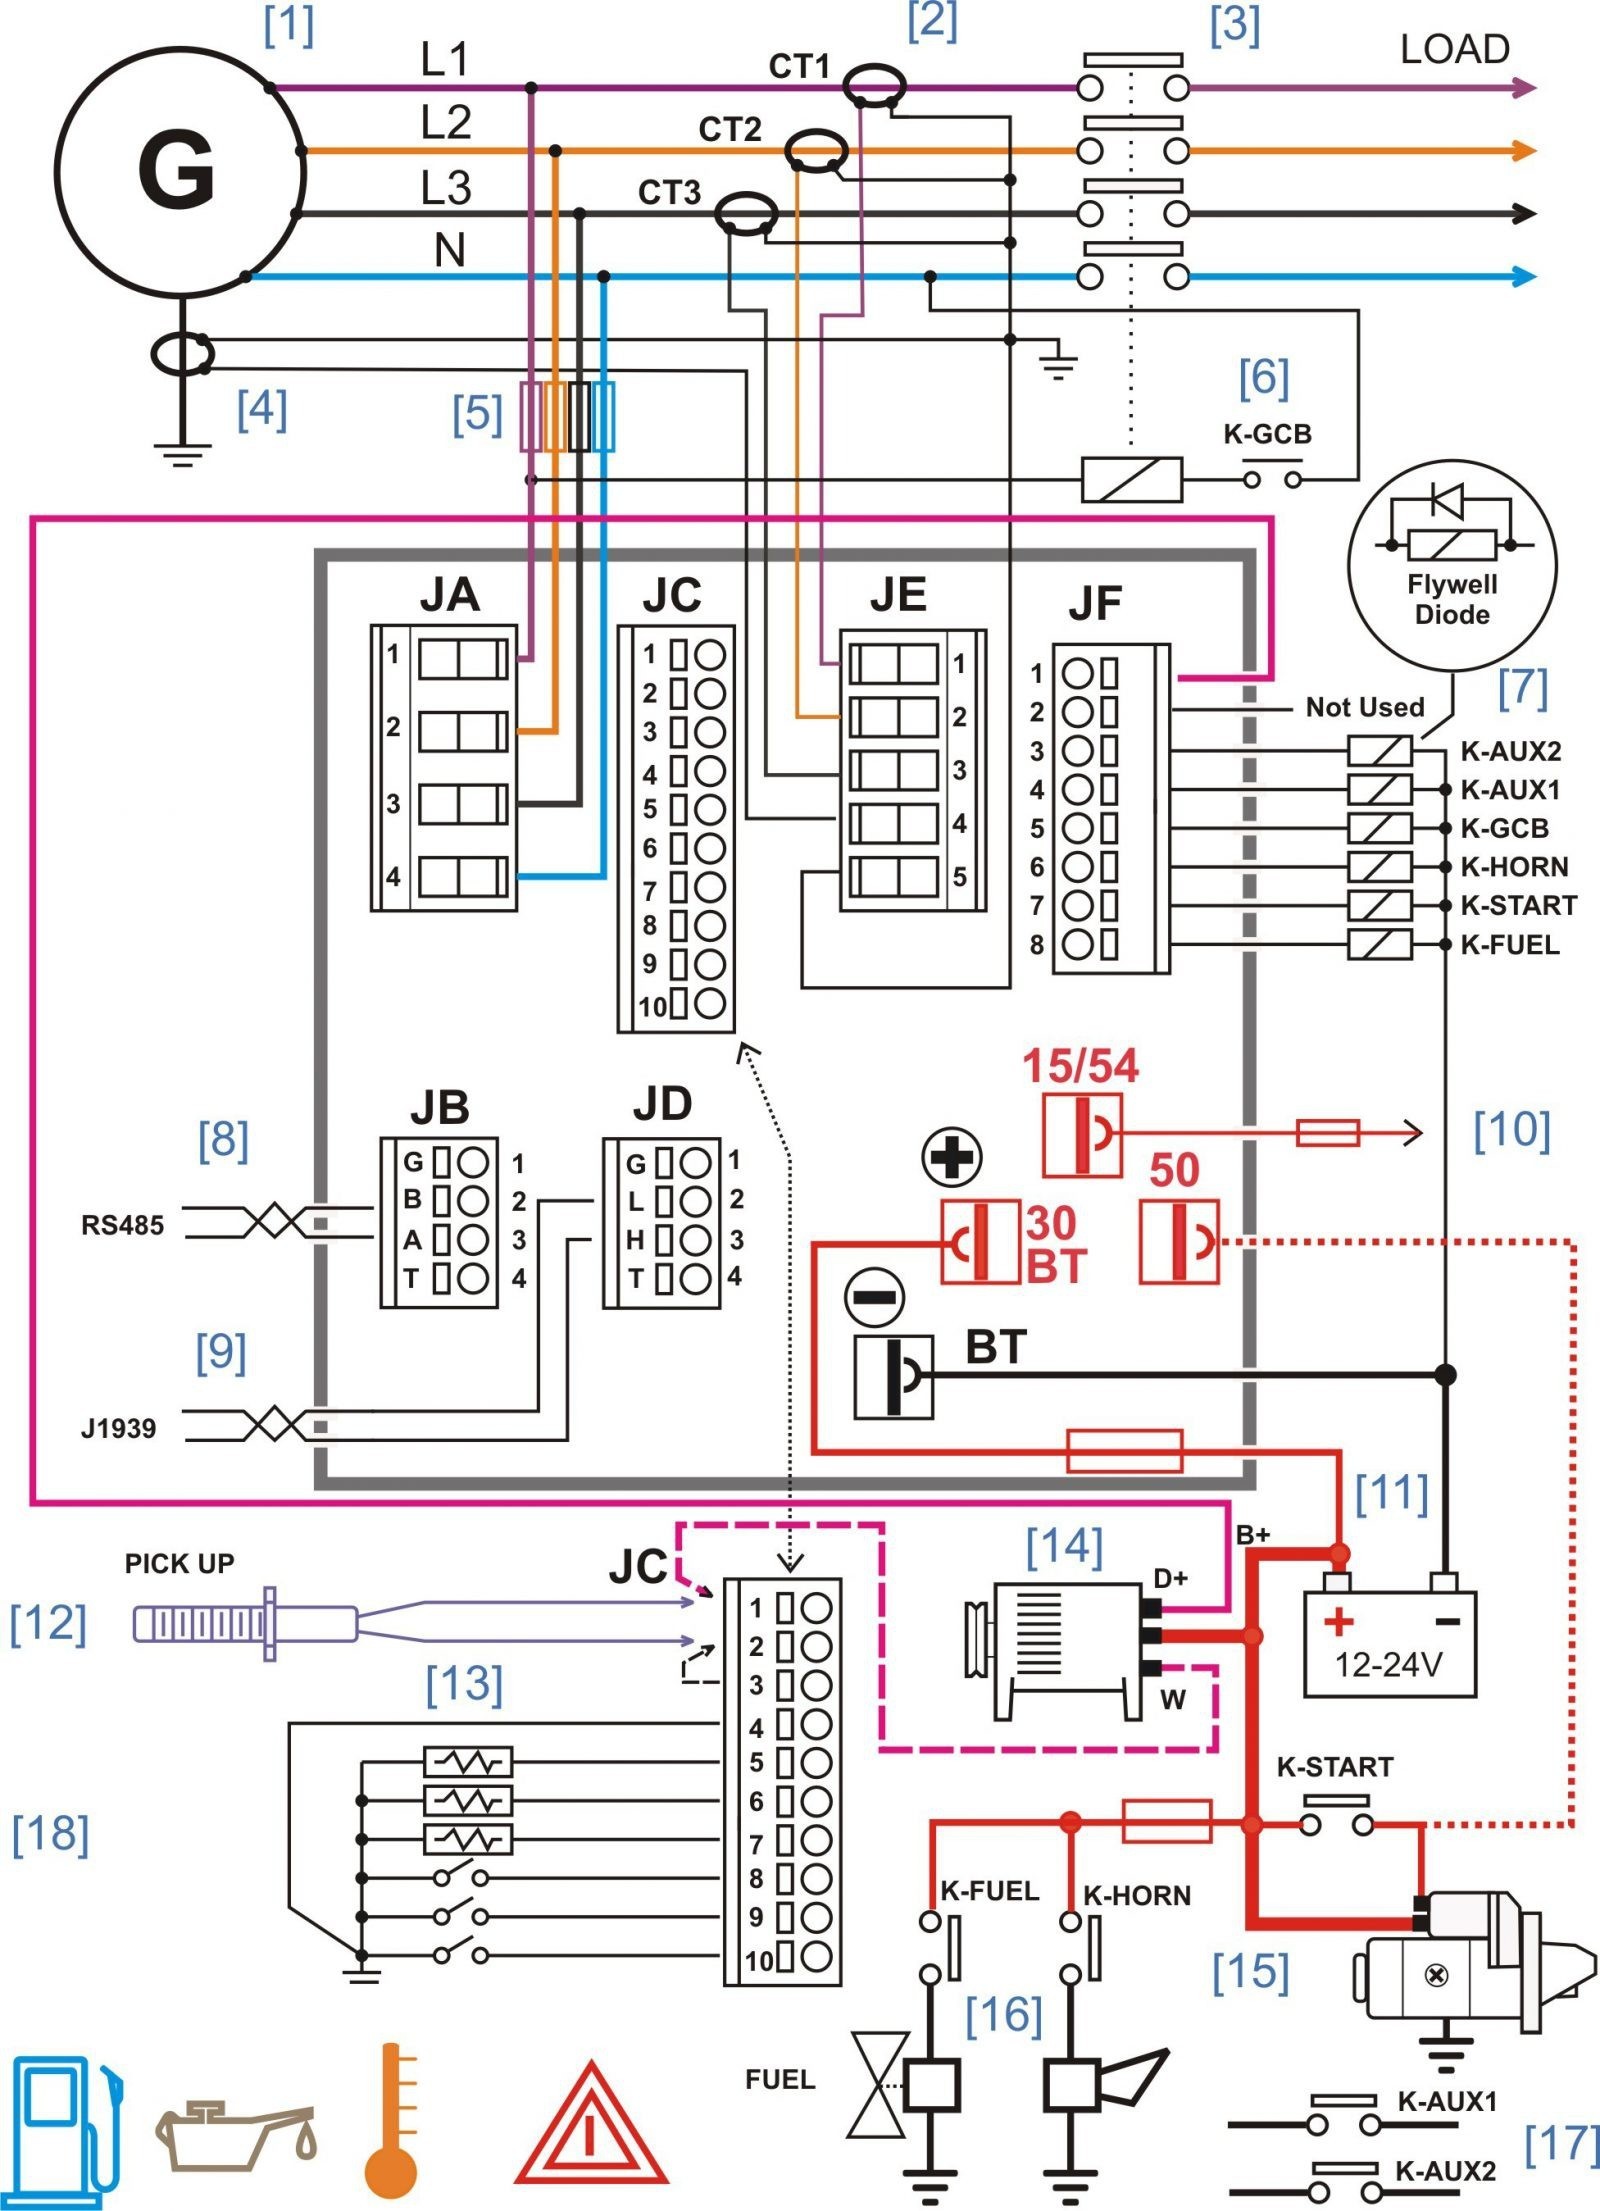 Car Radio Wiring Diagram Kenwood Stereo Kdc 210u Within In Delphi Delco Part Number And